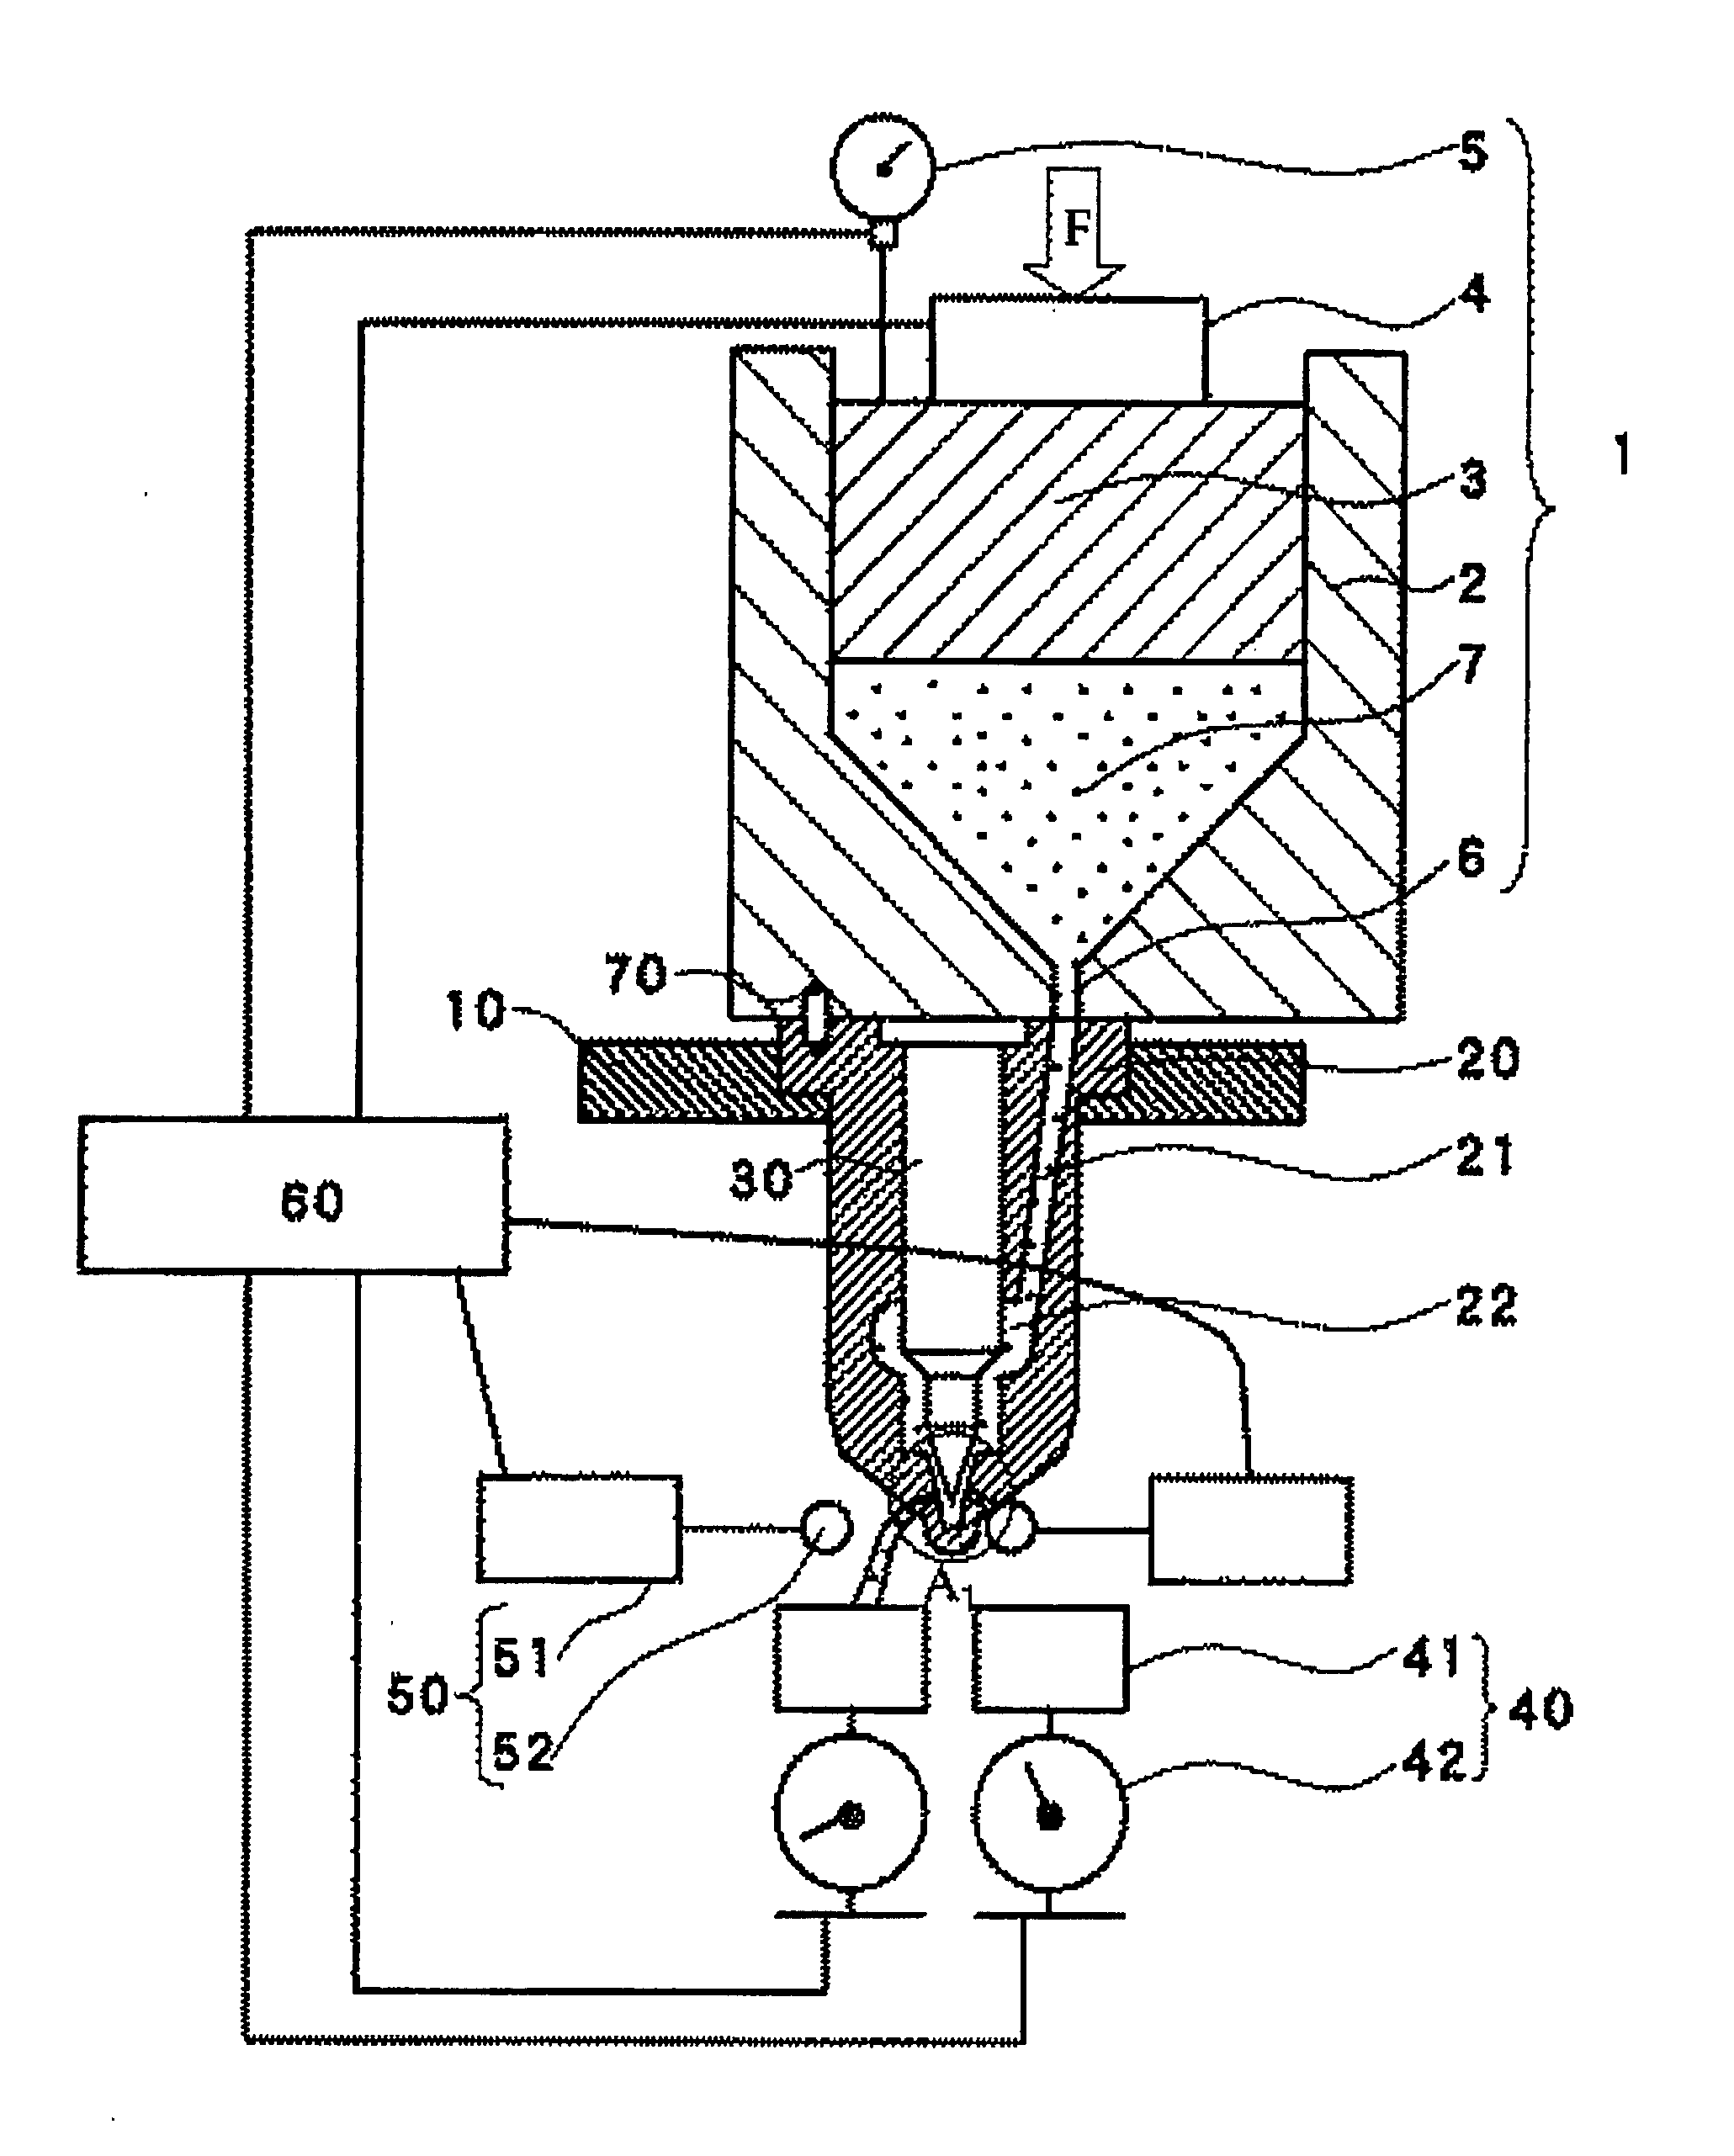 Method of machining injection hole in nozzle body, apparatus therefore, and fuel injection nozzle produced using the method and apparatus